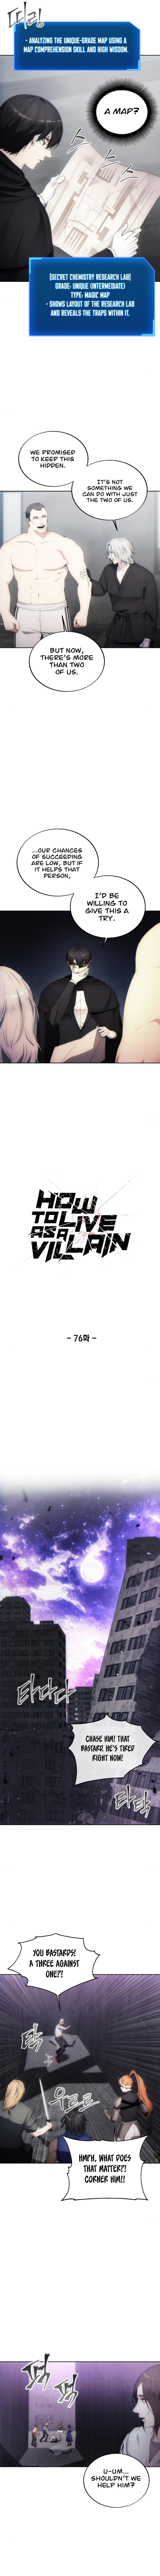 How to Live as a Villain - Chapter 76 Page 6